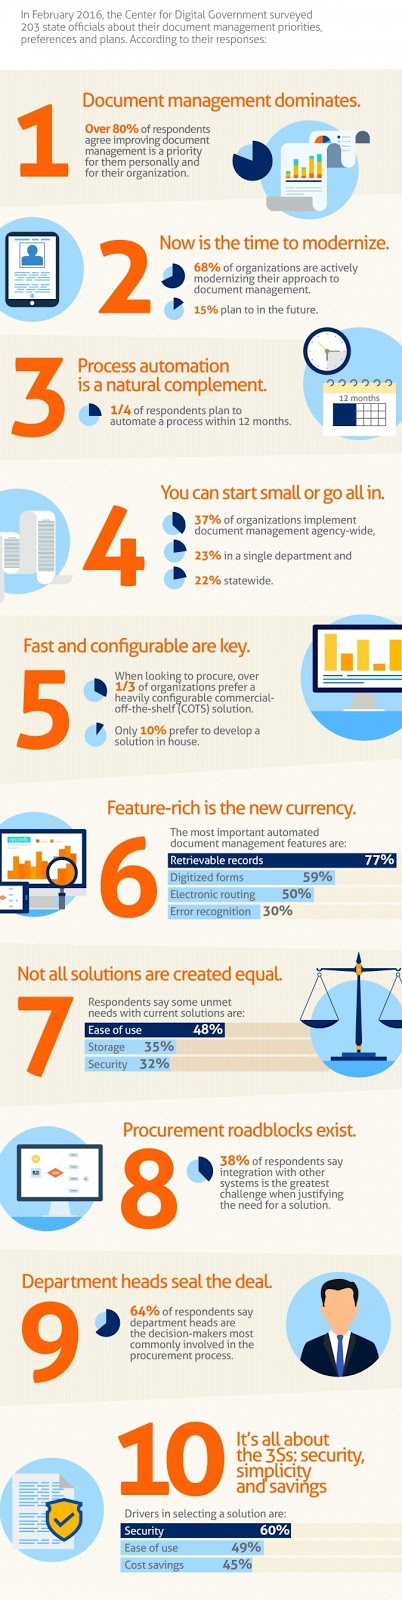 [Infographic] 10 Things to Know About Document Management in the Public Sector